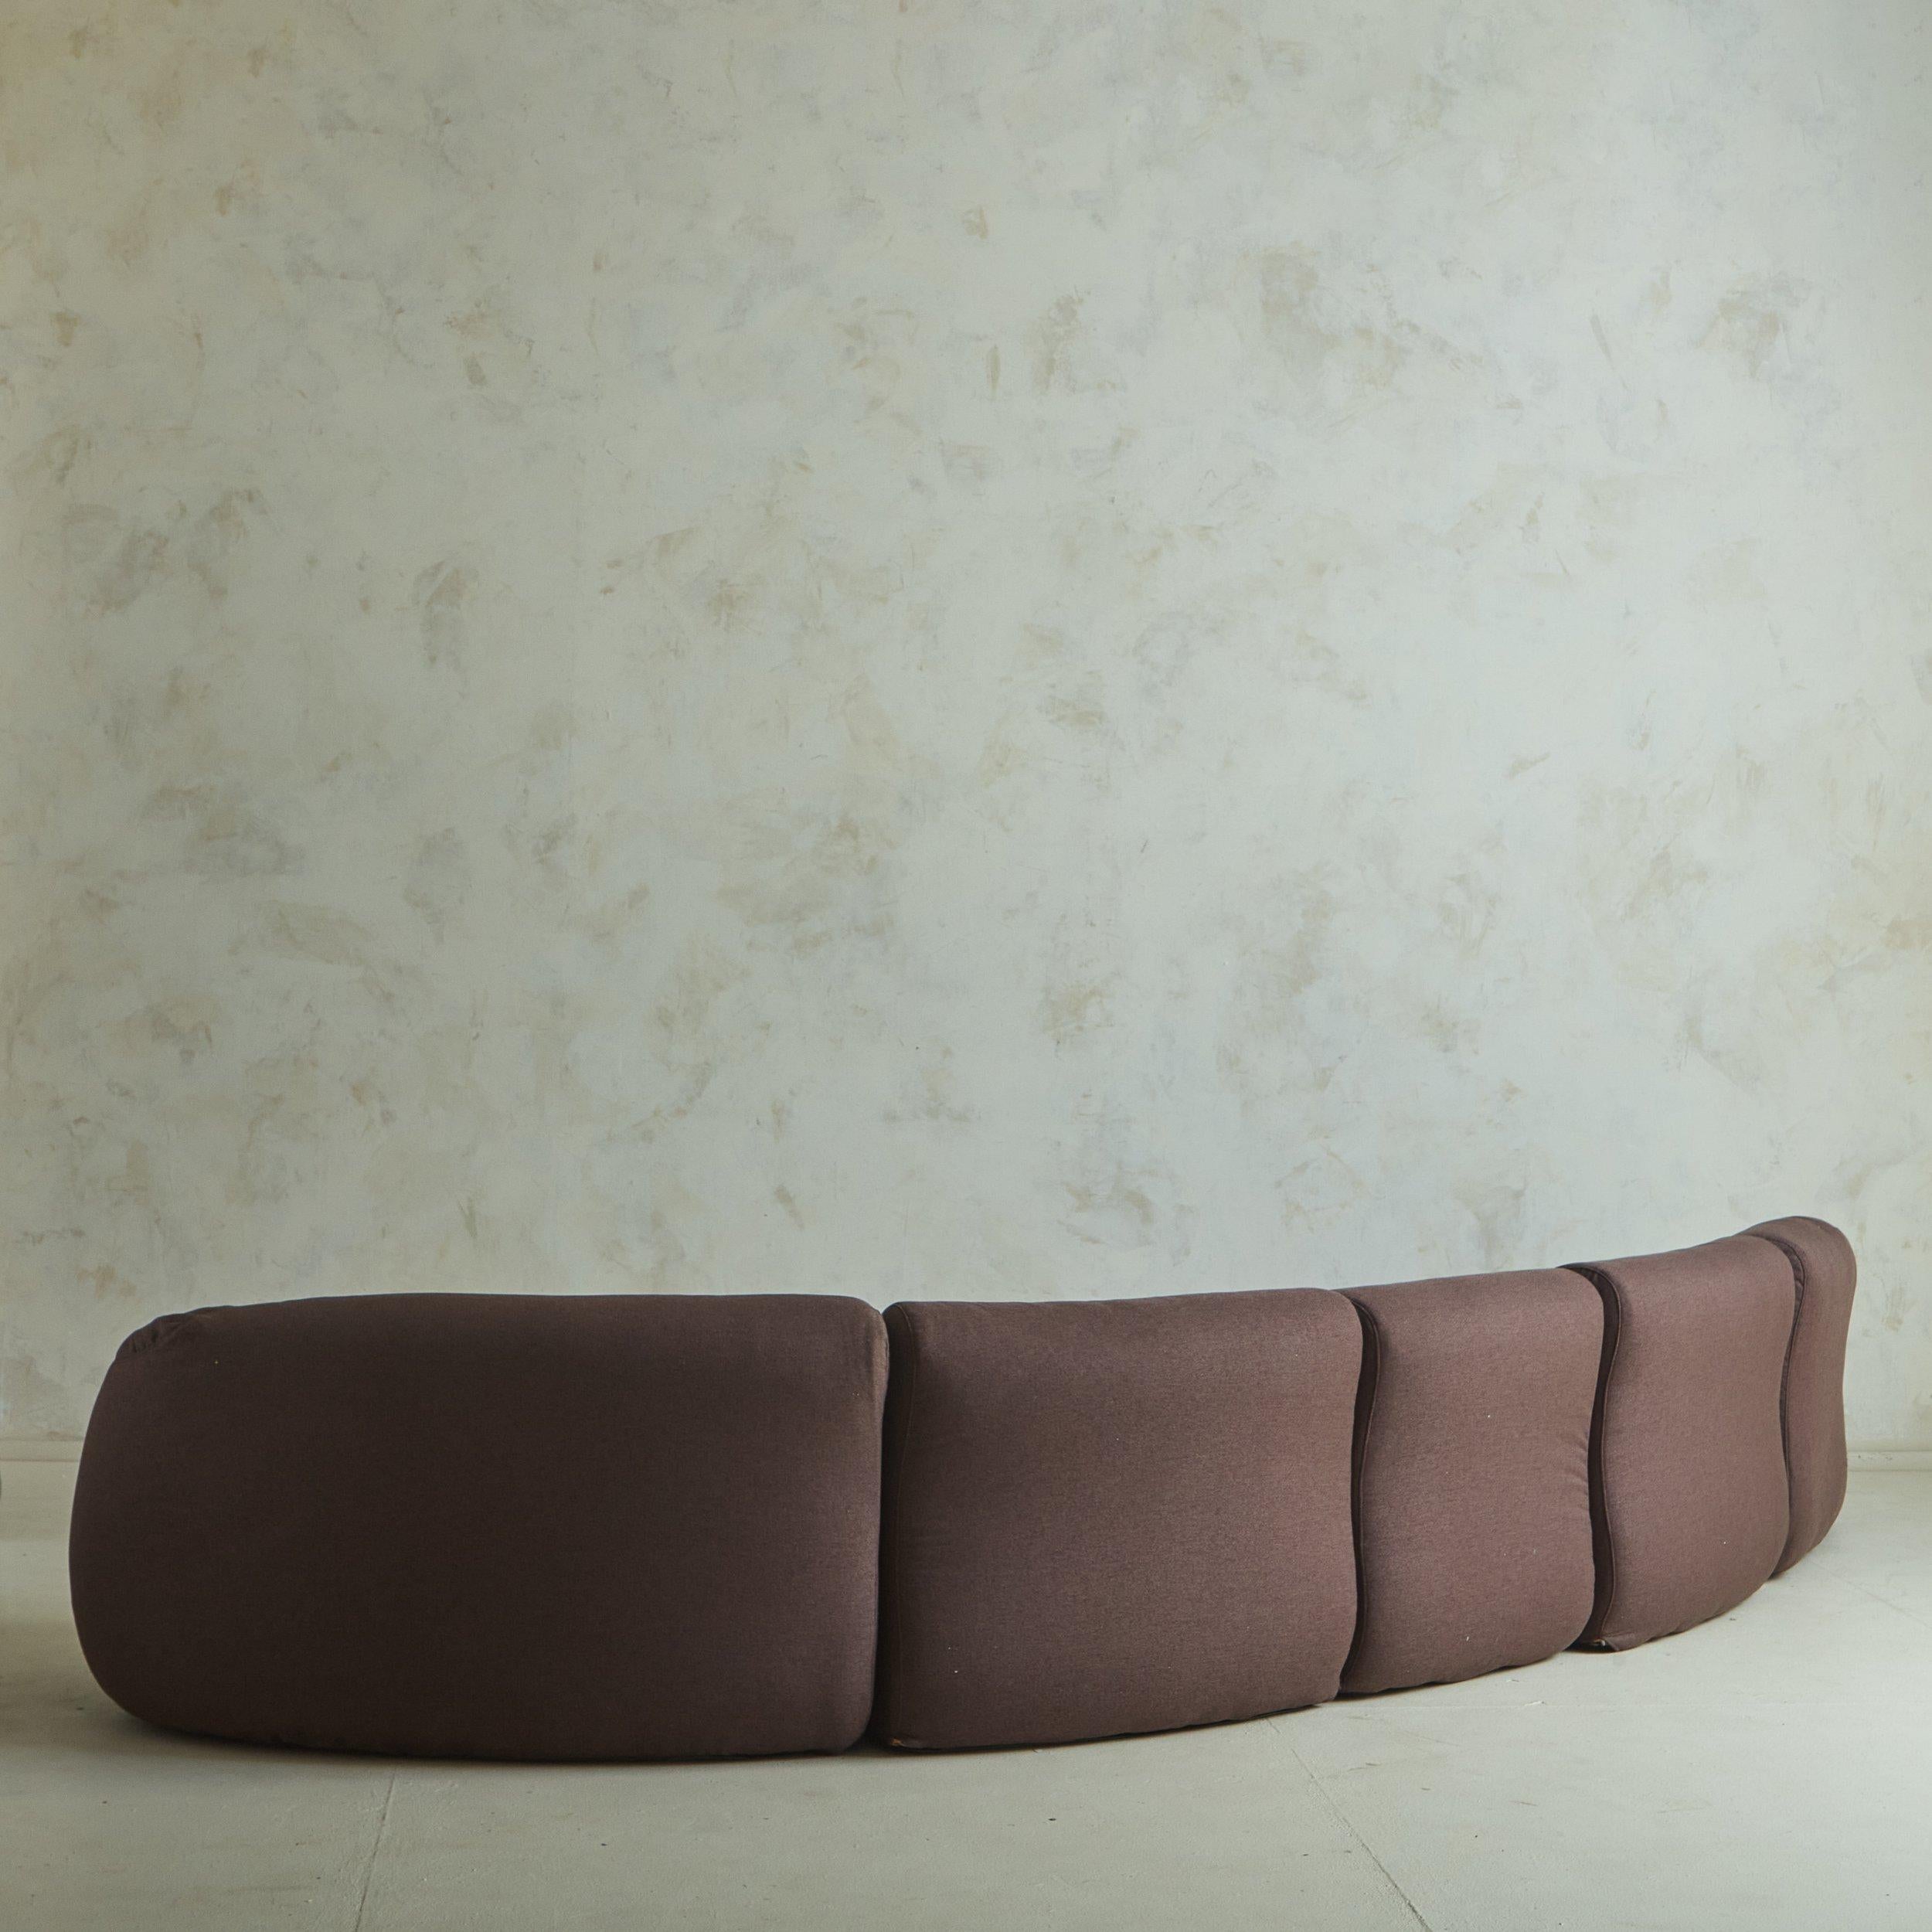 A rare five piece Carrera modular sofa designed by Jonathan De Pas, Donato D’Urbino and Paolo Lomazzi for BBB Italia in 1969. This stunning sofa has two curved corner sections and three center sections with ribbed seat detailing. It was restored by